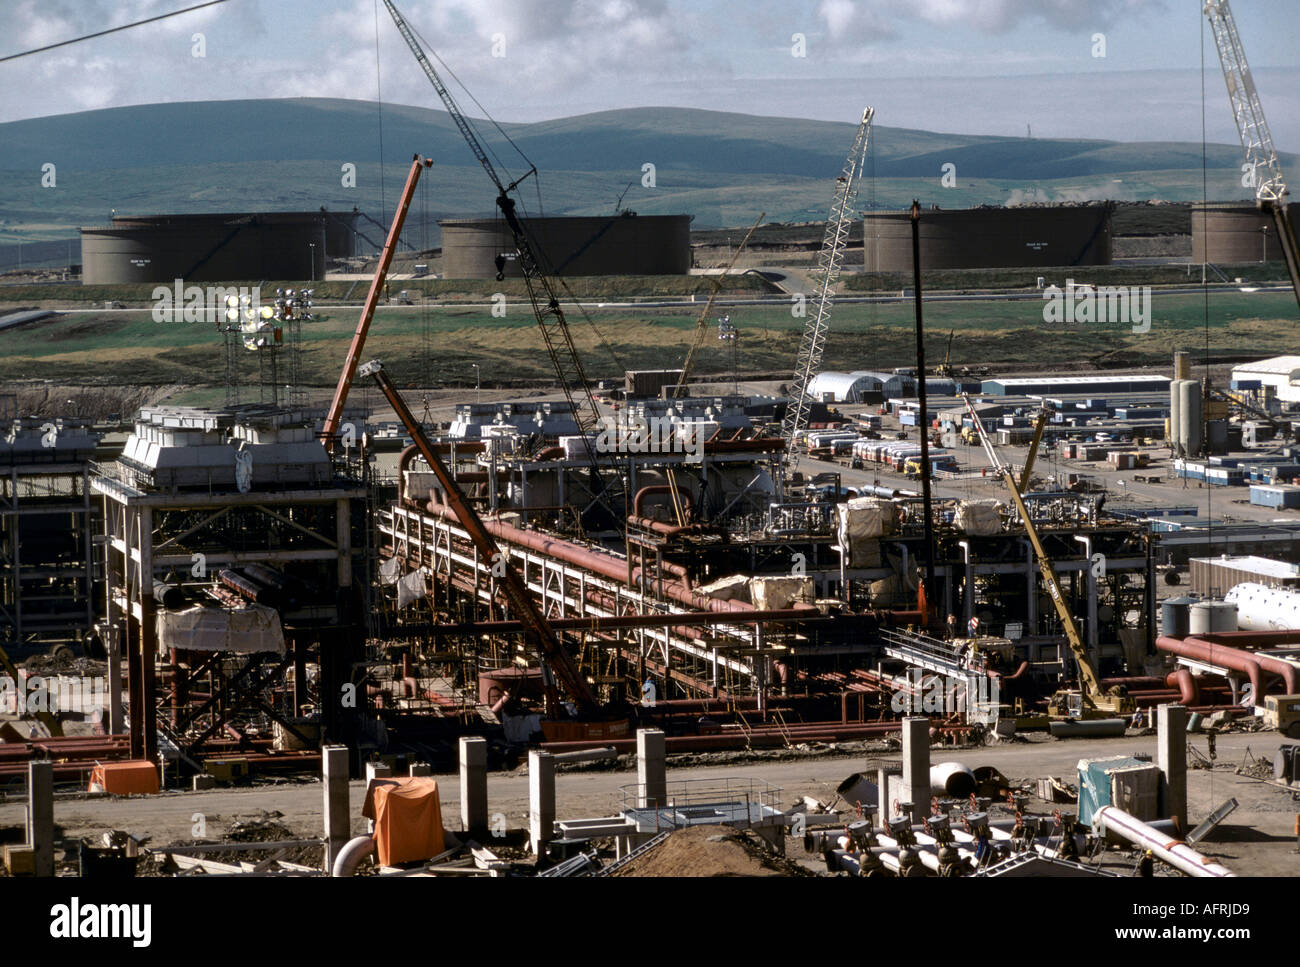 Sullom Voe 1970s Shetland Islands Scotland construction of oil industry site for BP British Petroleum to take North Sea oil. 1979 HOMER SYKES Stock Photo